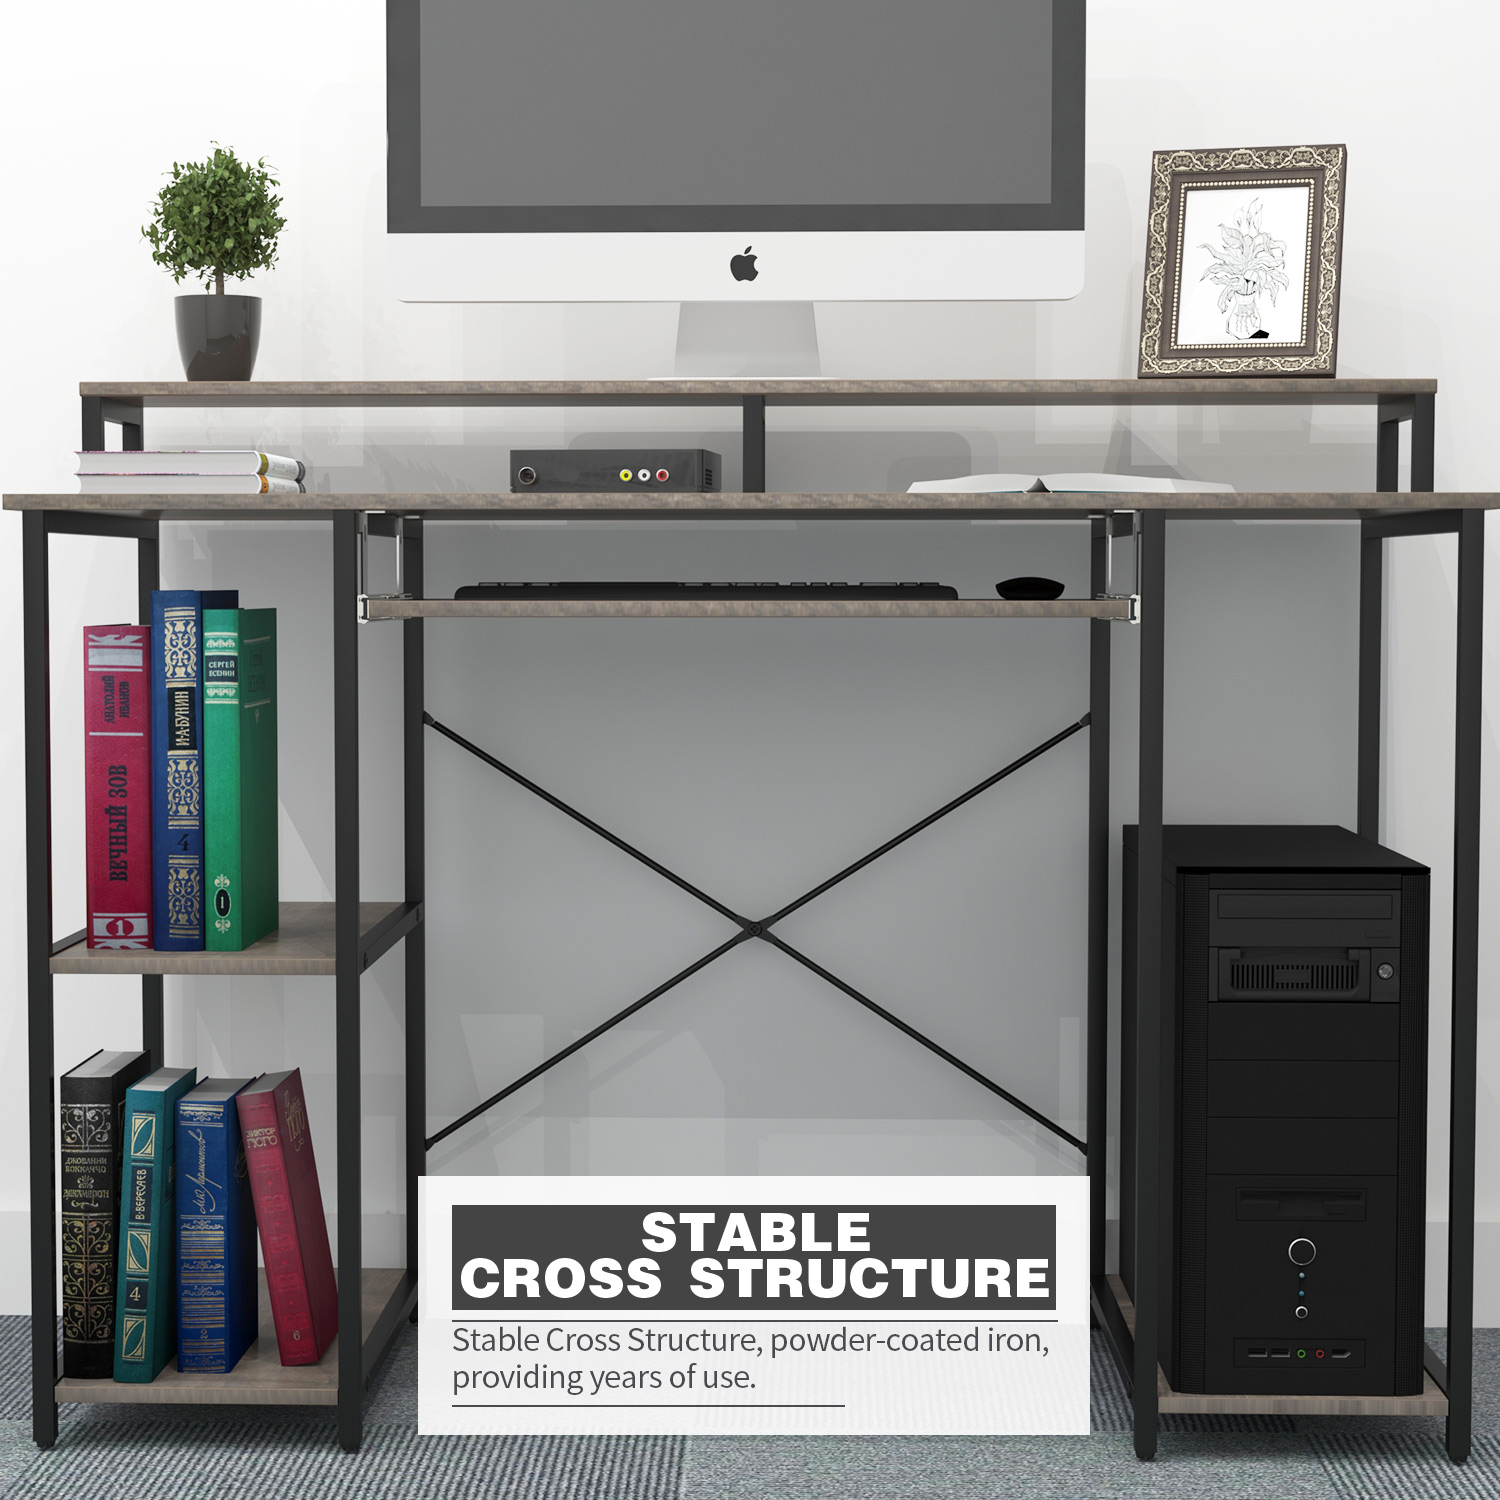 TOPSKY 46.5”Computer Desk with Storage Shelves/23.2" Keyboard Tray/Monitor Stand Study Table for Home Office S-205